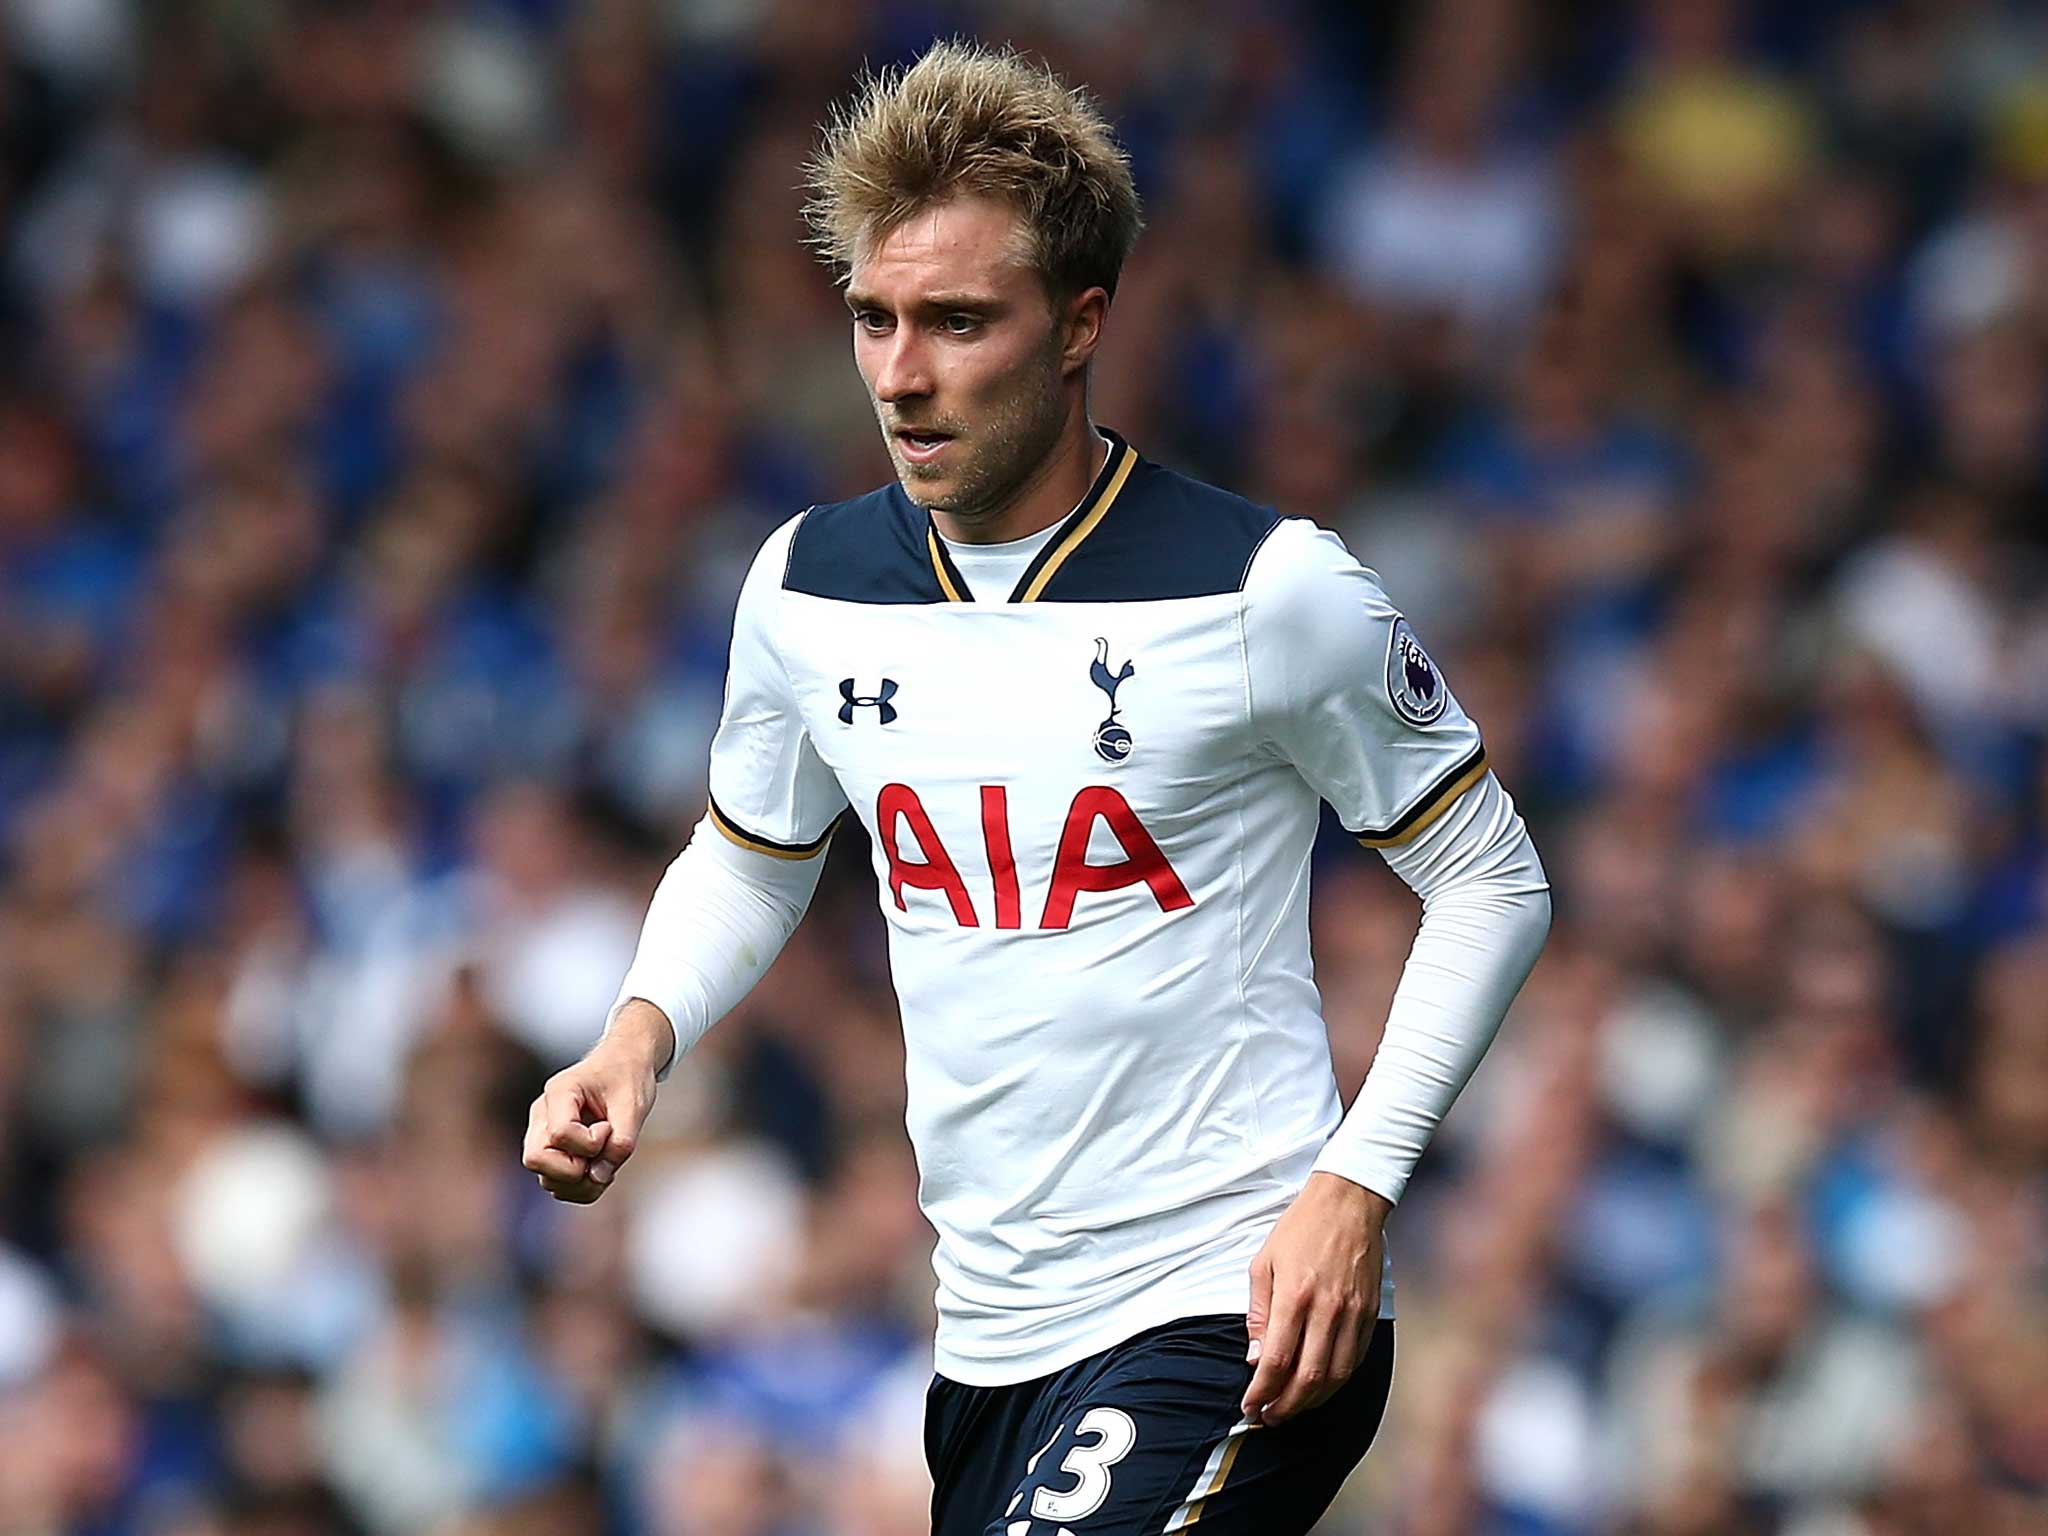 Christian Eriksen in action against Everton on the opening day